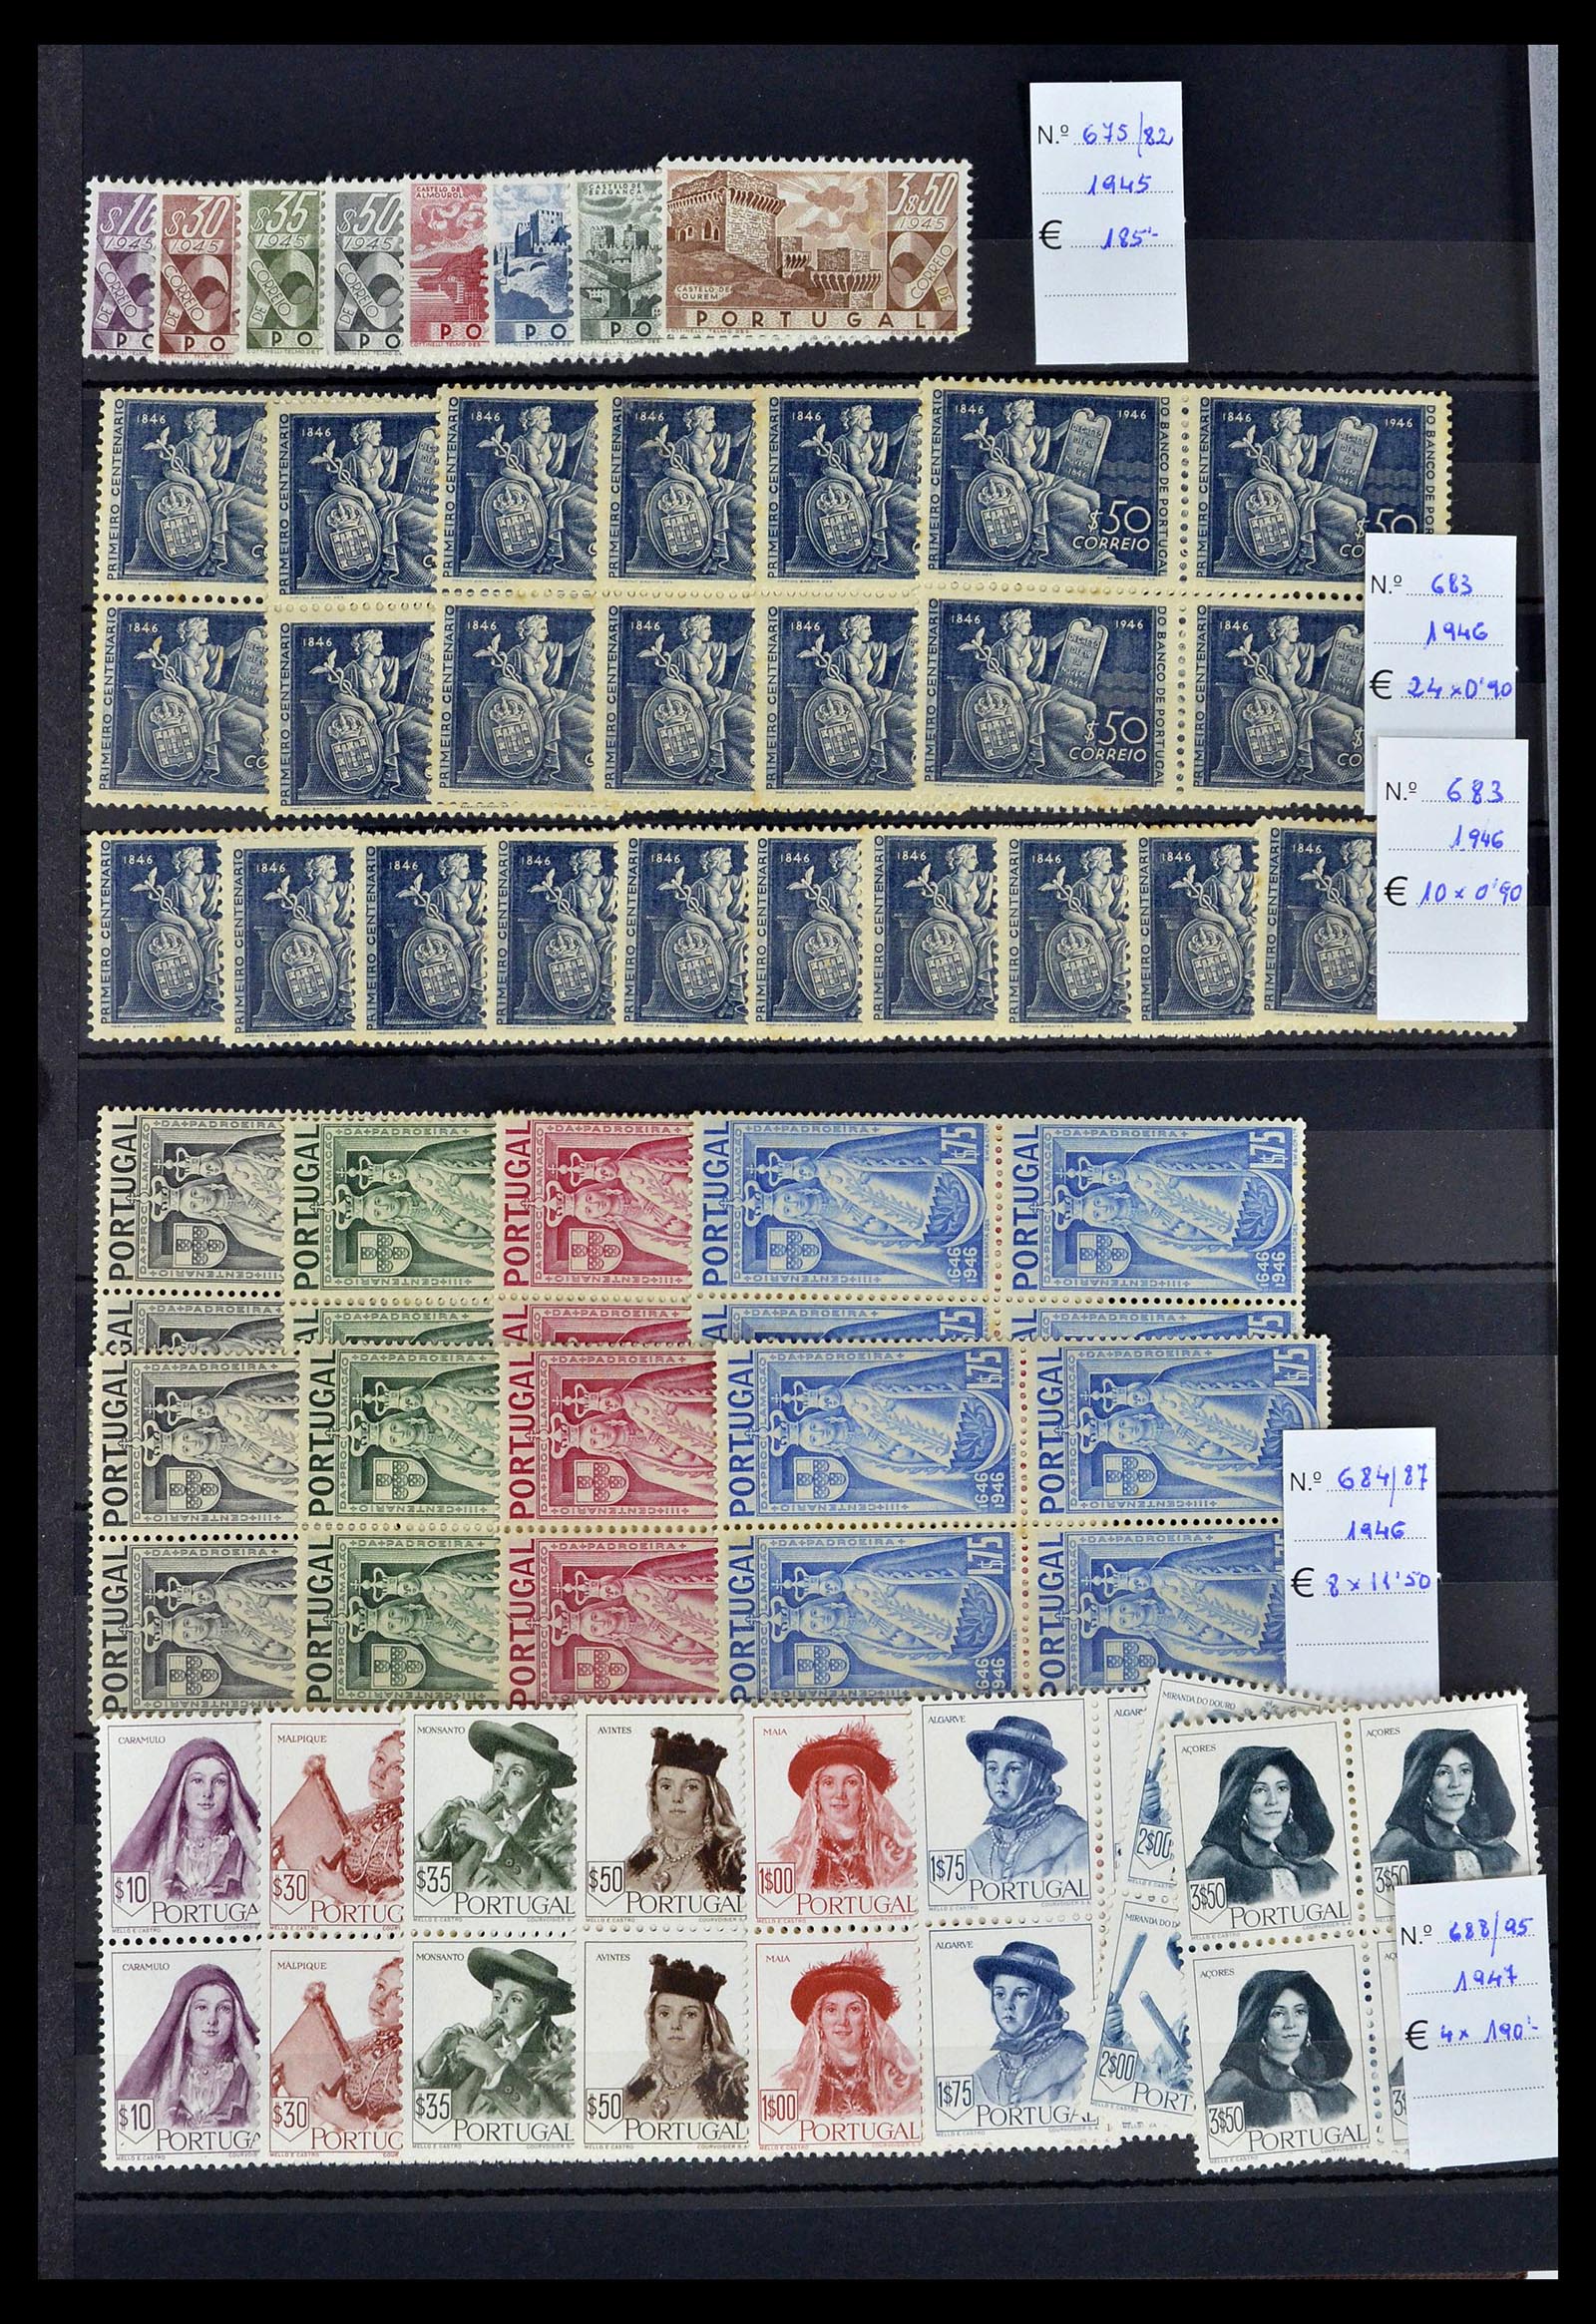 39236 0009 - Stamp collection 39236 European countries 40s-60s.